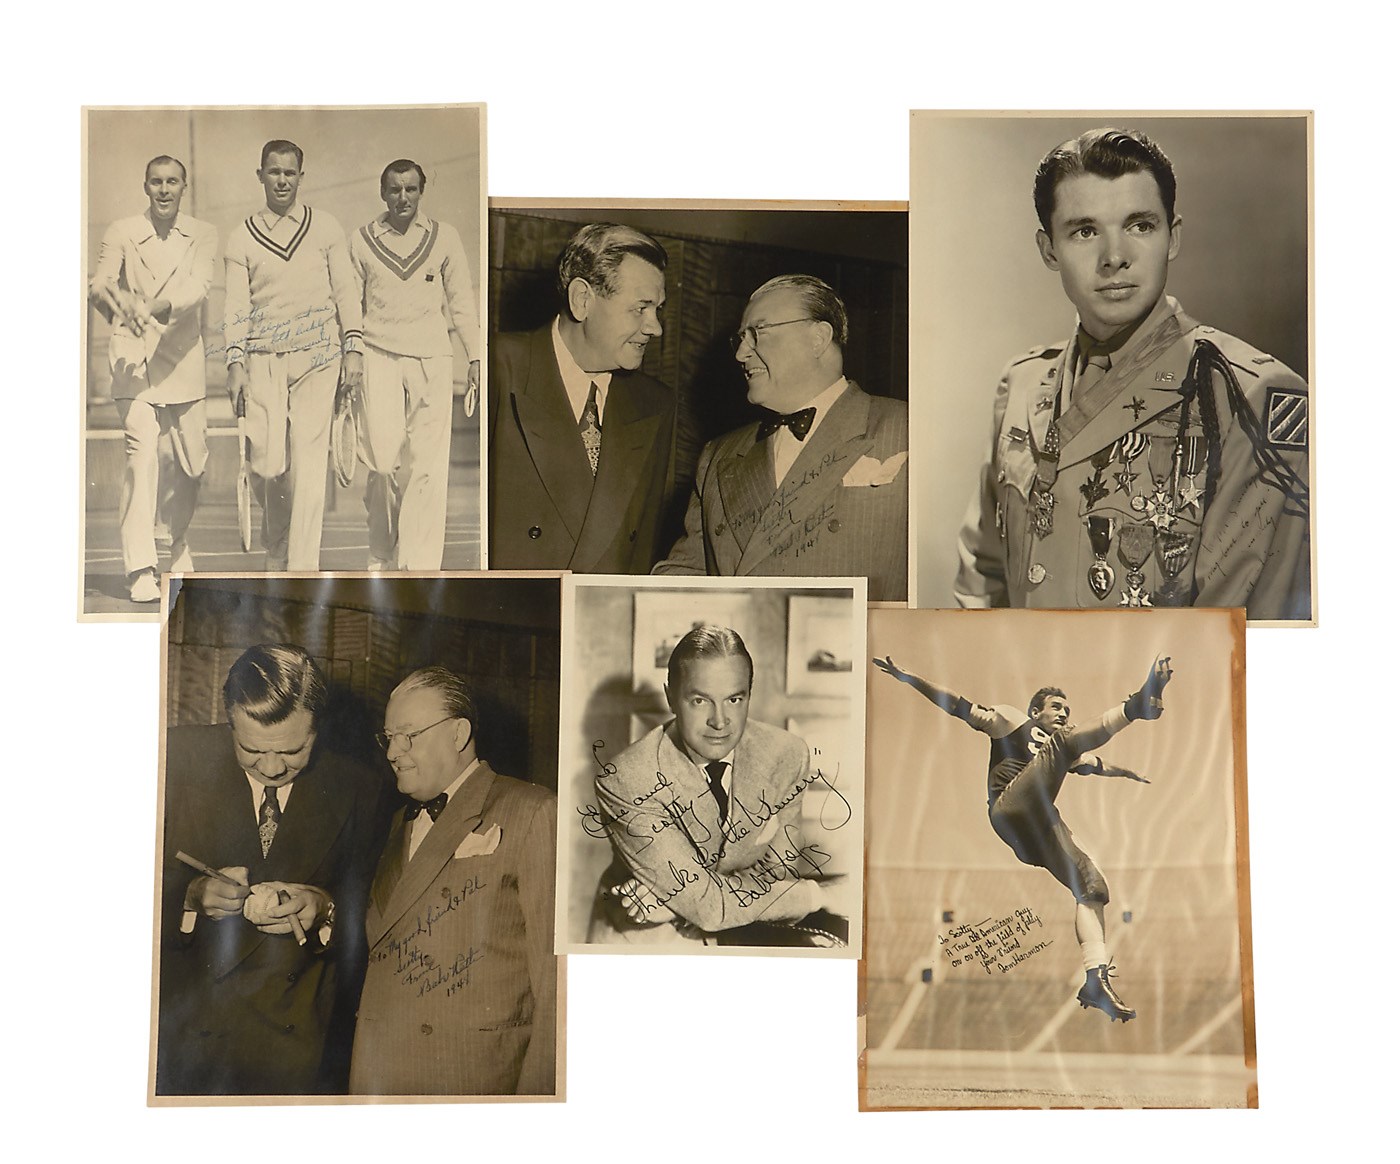 Baseball Autographs - Two Oversized Babe Ruth & Other Signed Photos to Hollywood Producer (10+)